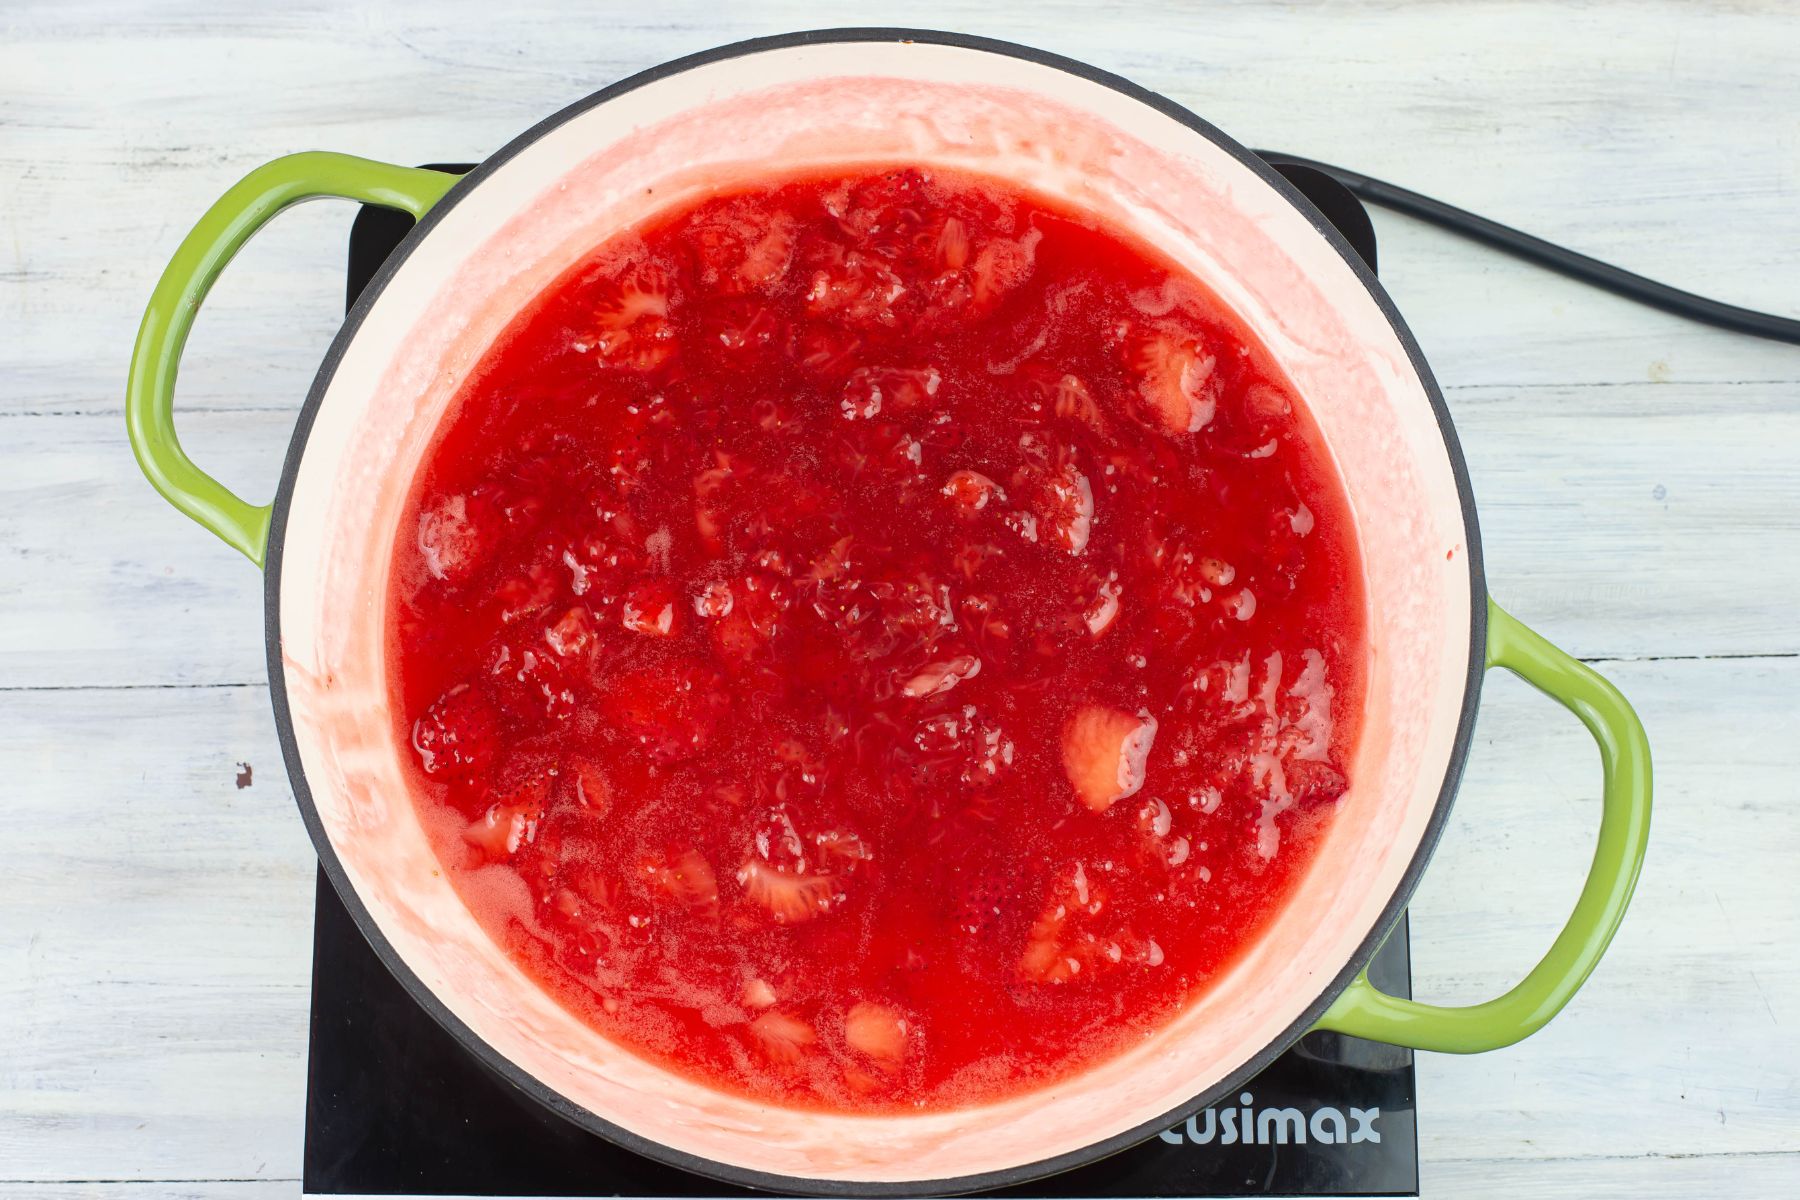 Strawberry filling or sauce cooling in the skillet.